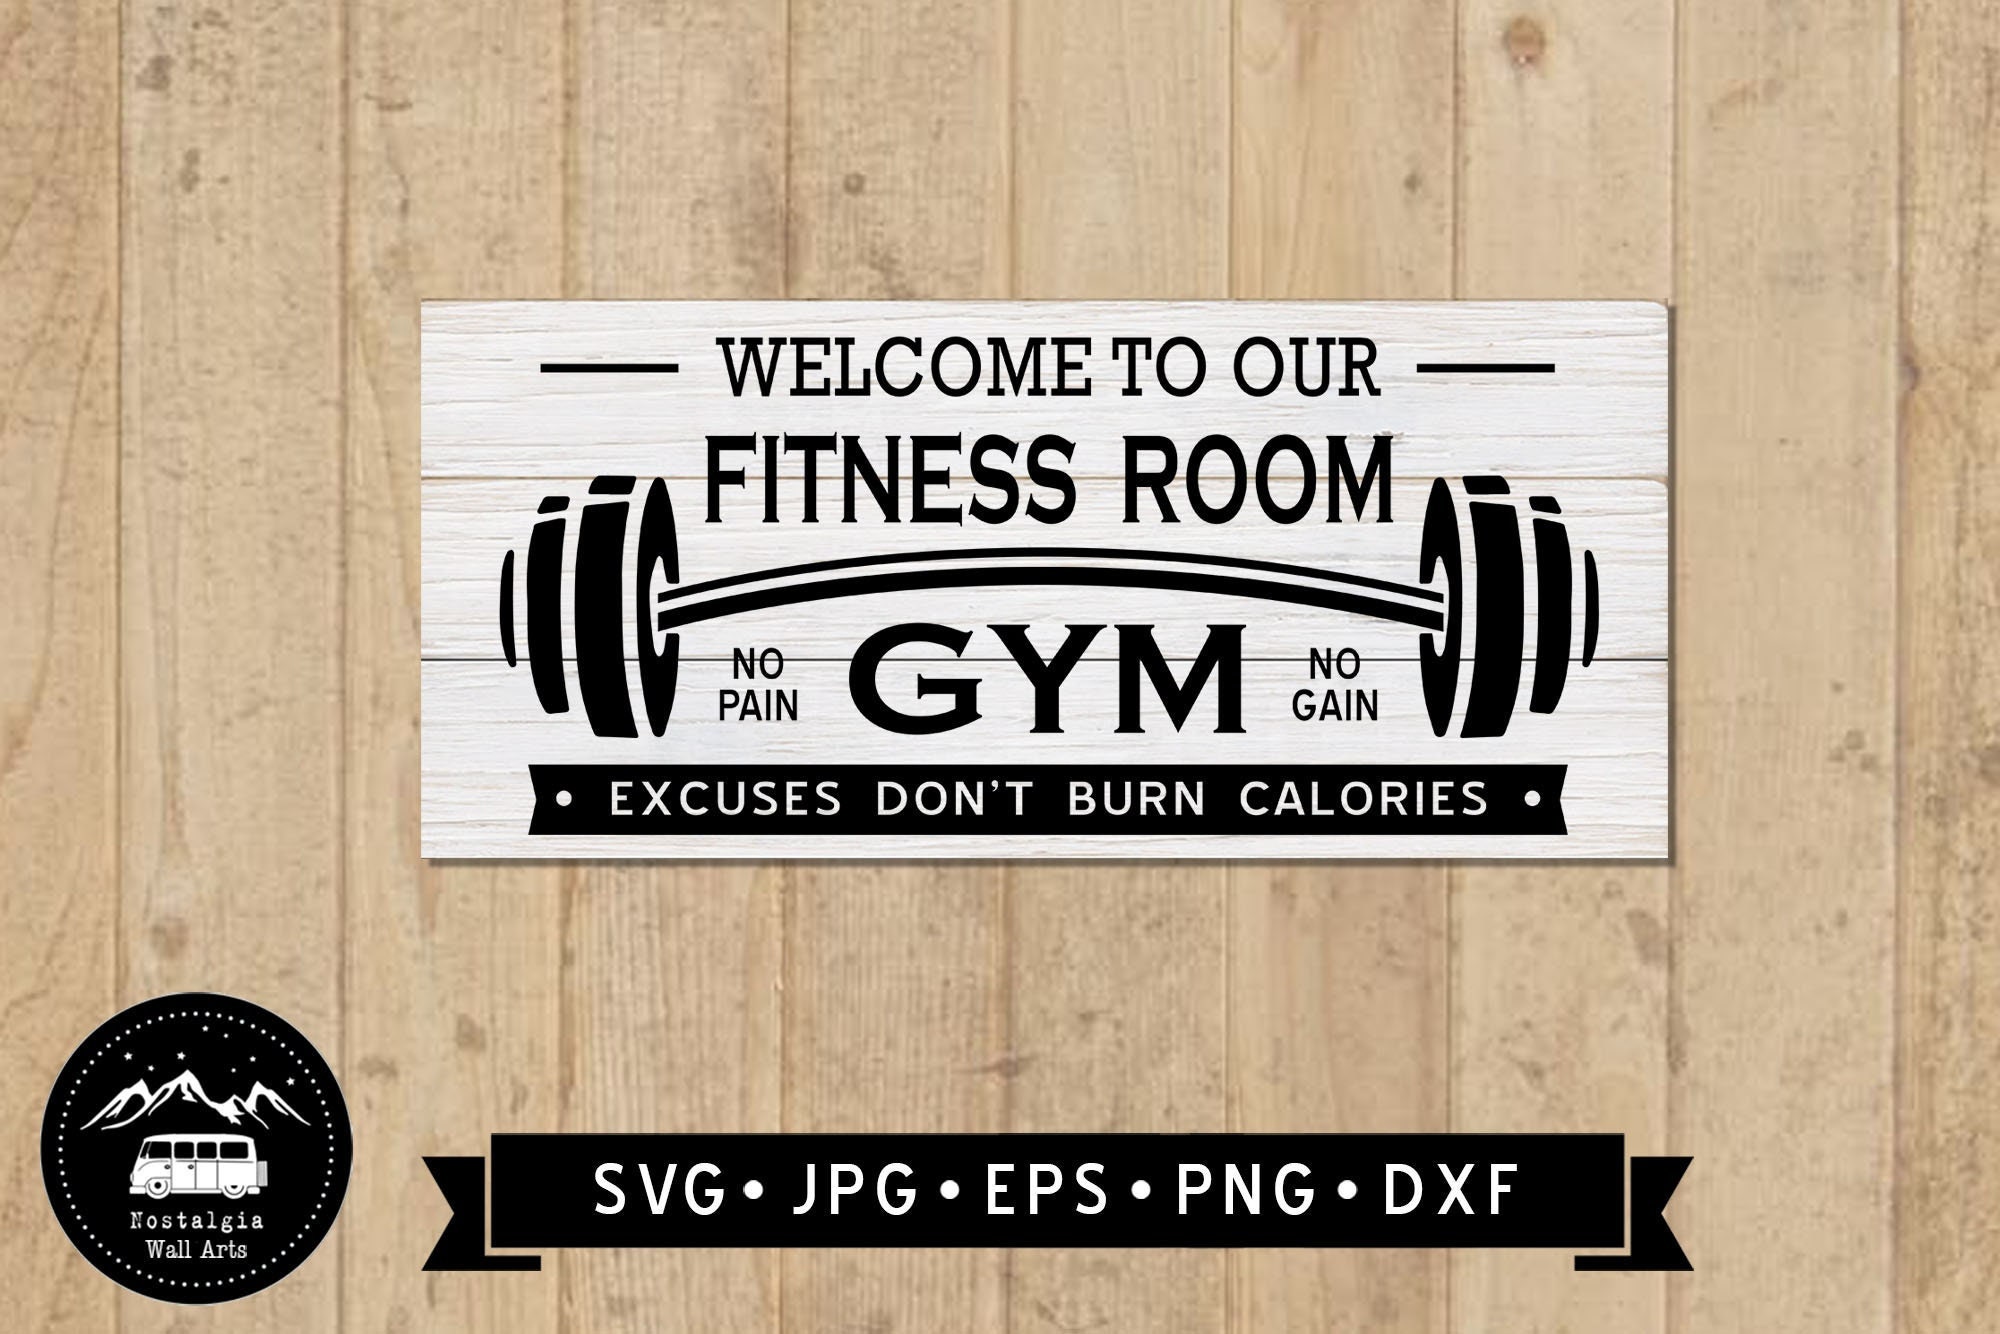 Welcome to Our Fitness Room Sign SVG, GYM Sign SVG, Gym Sign